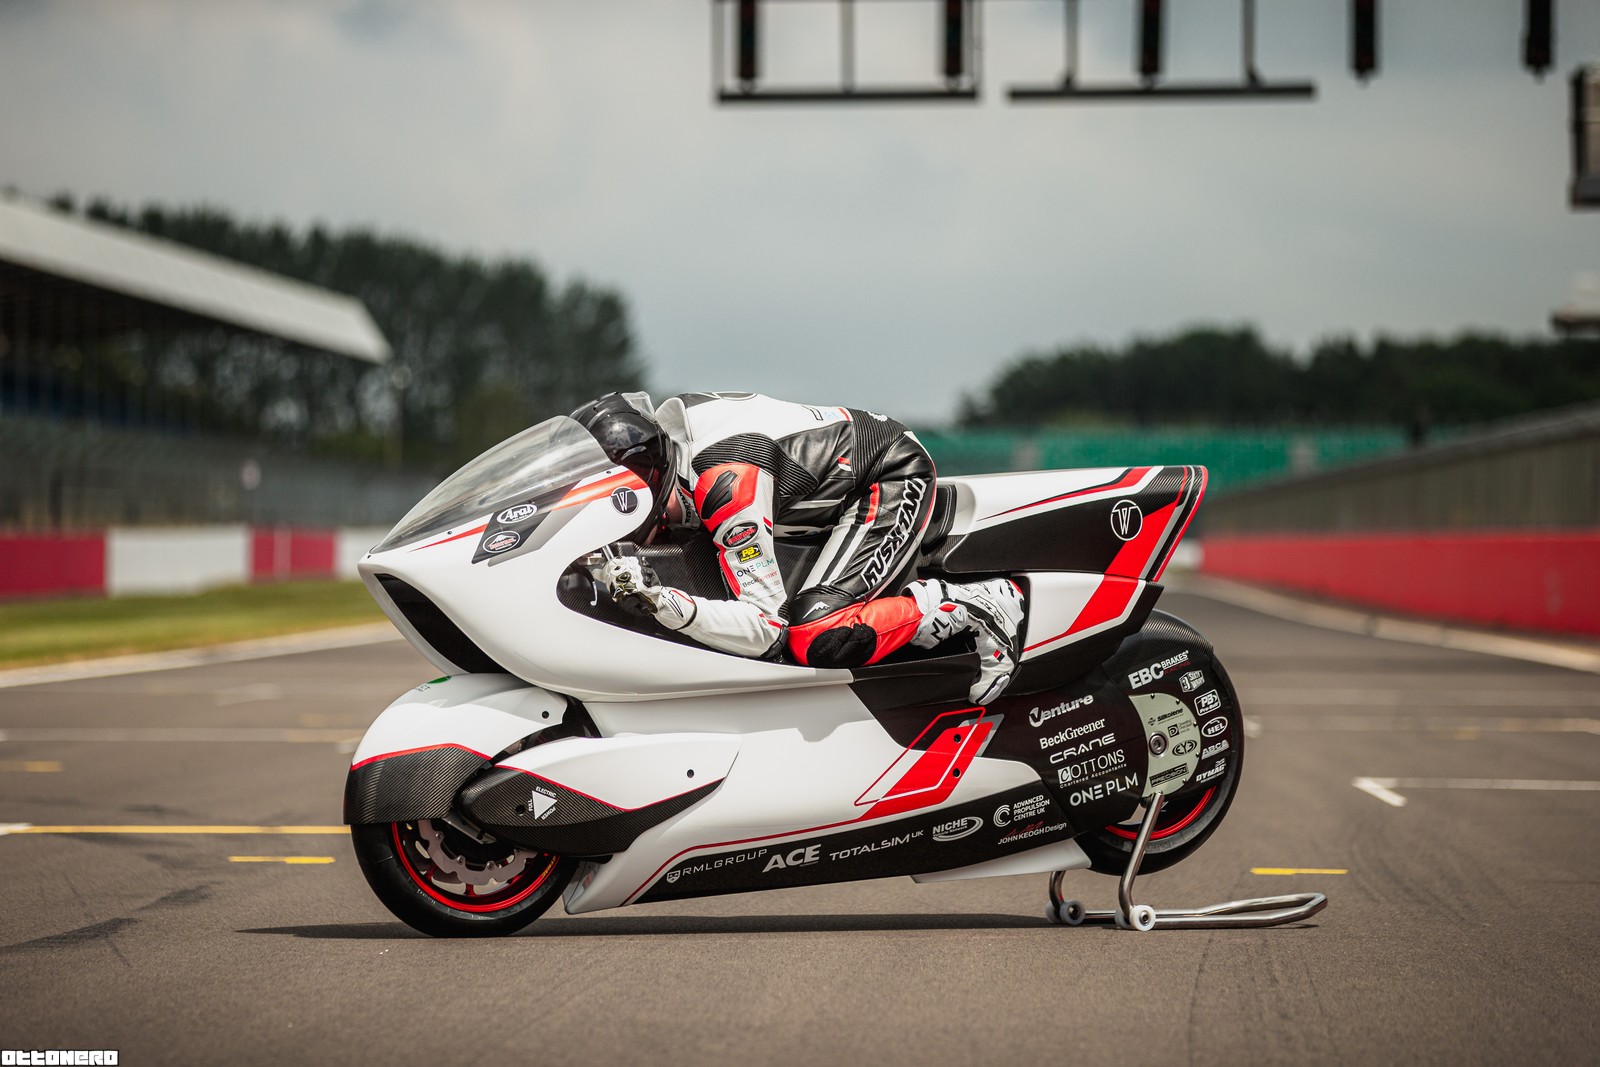 wmc250ev ⚡ The World's Fastest Electric Motorcycle / White motorcycle  concepts